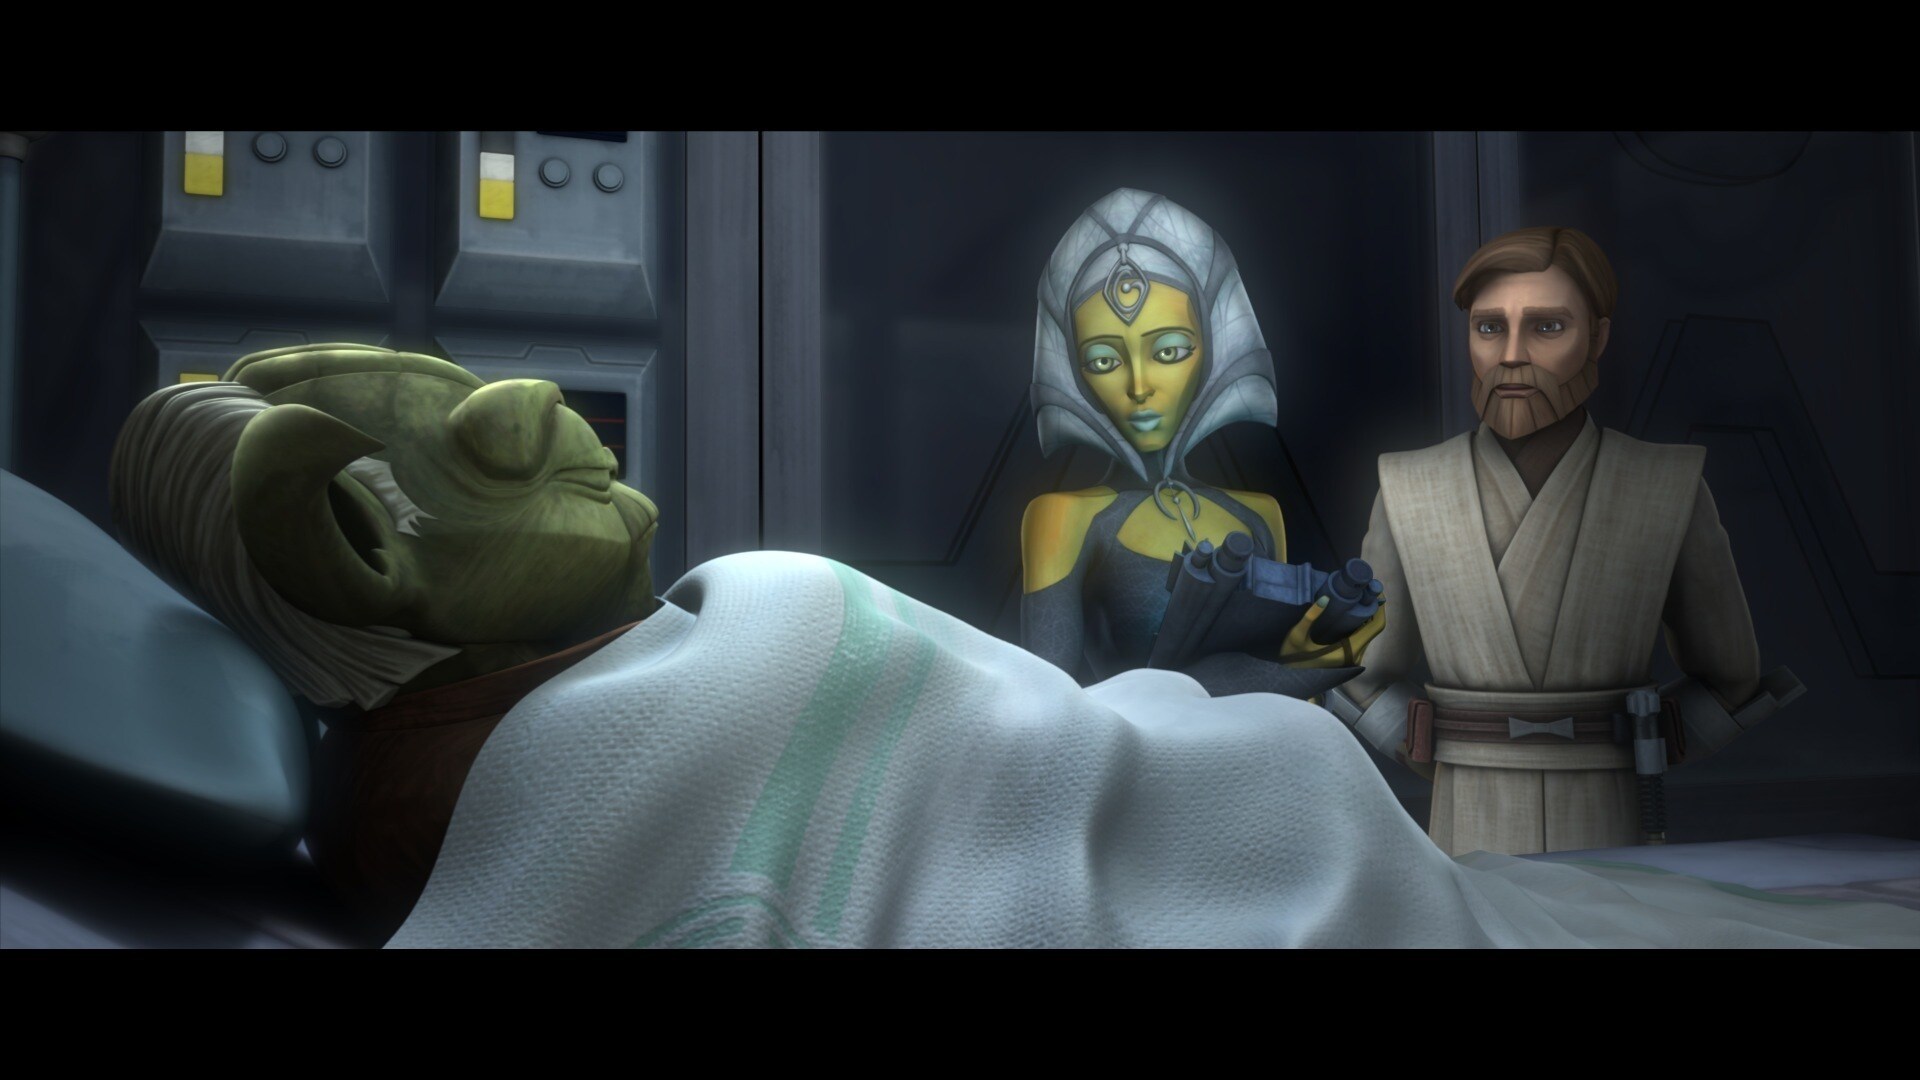 Yoda lies in a bed in the Jedi Temple medical ward, closely examined by sensors. Jedi Doctor Rig ...